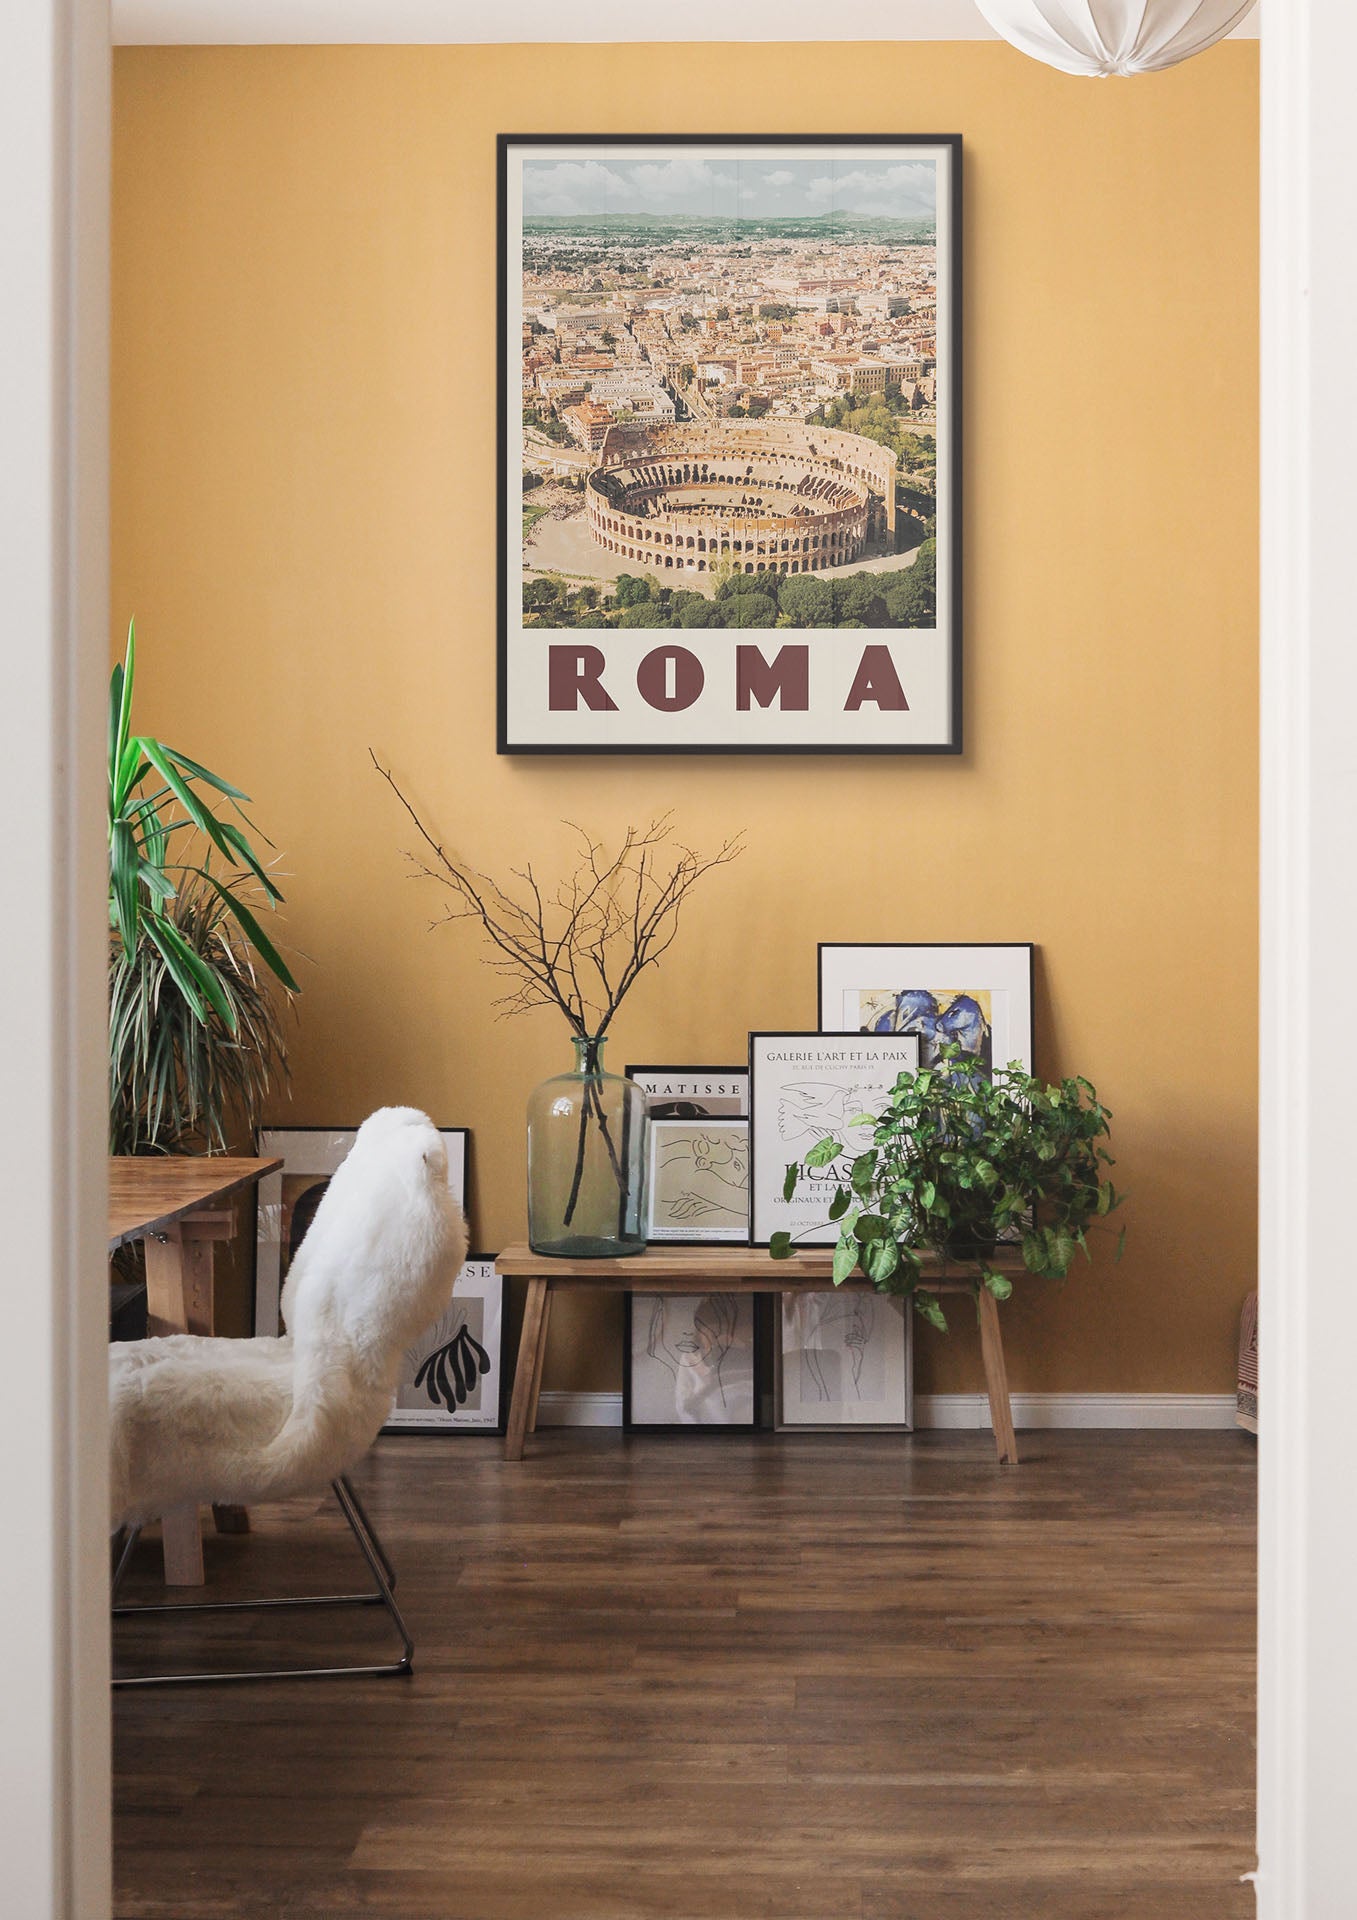 Rome, Italy - Vintage Travel Poster